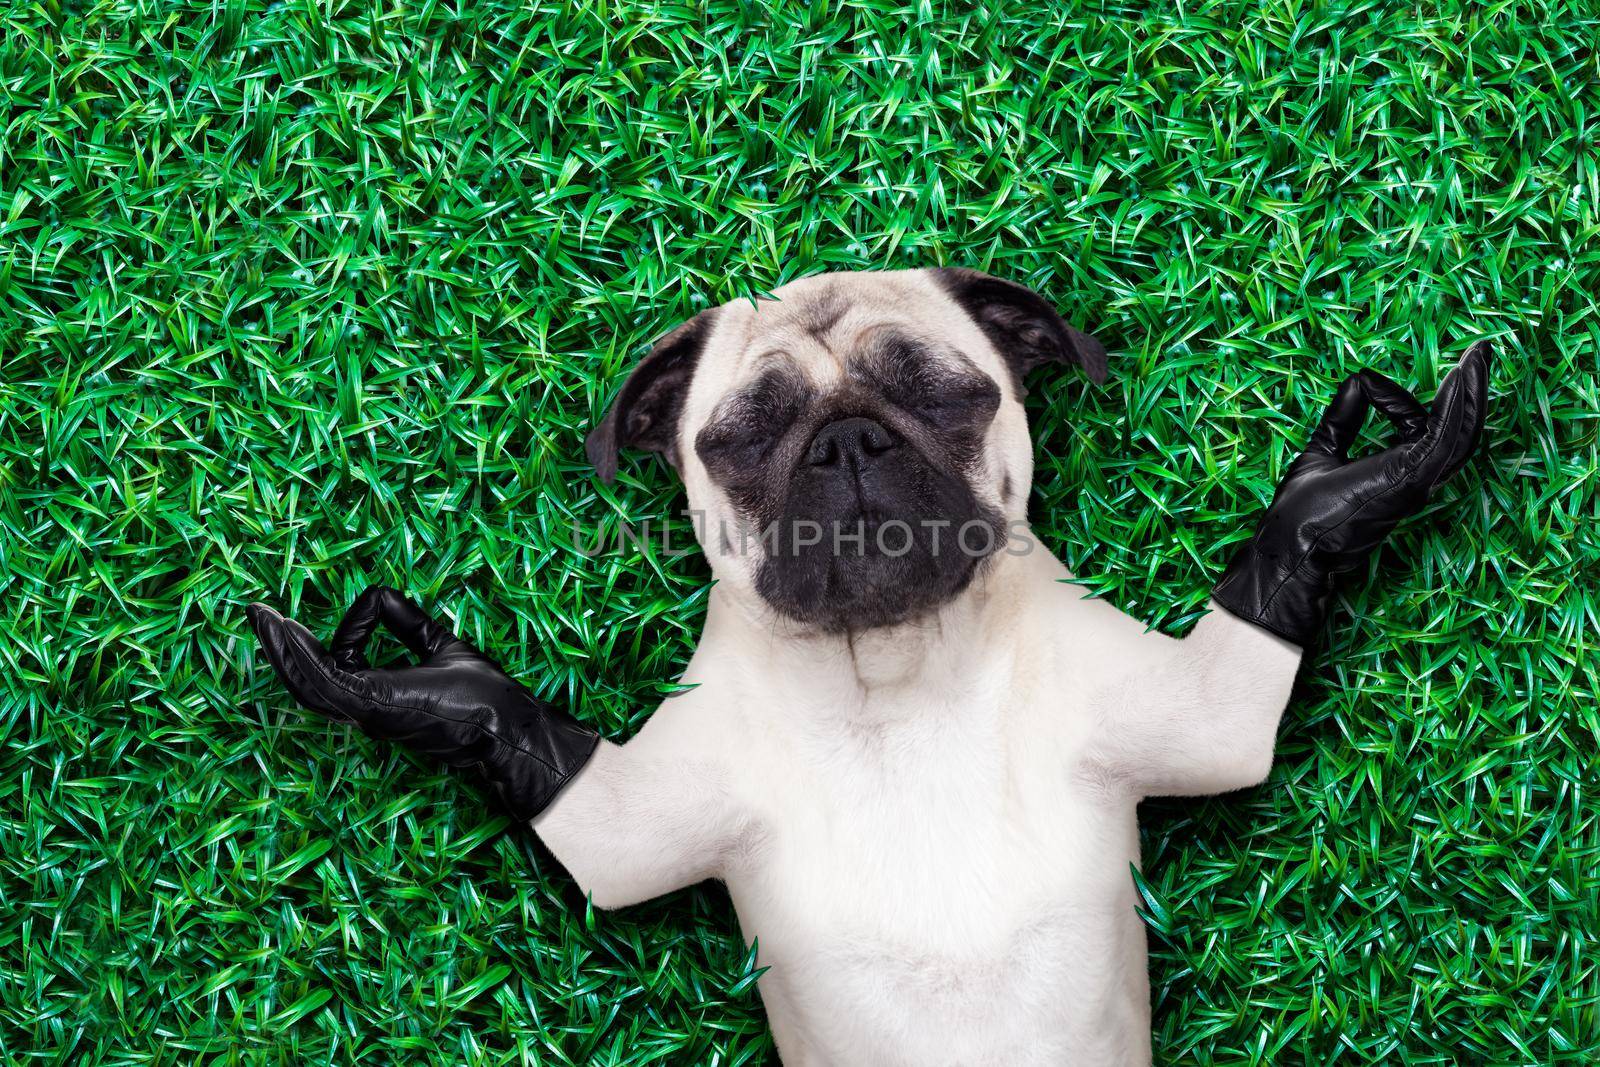 pug dog yoga meditating on grass or meadow in the park with closed eyes